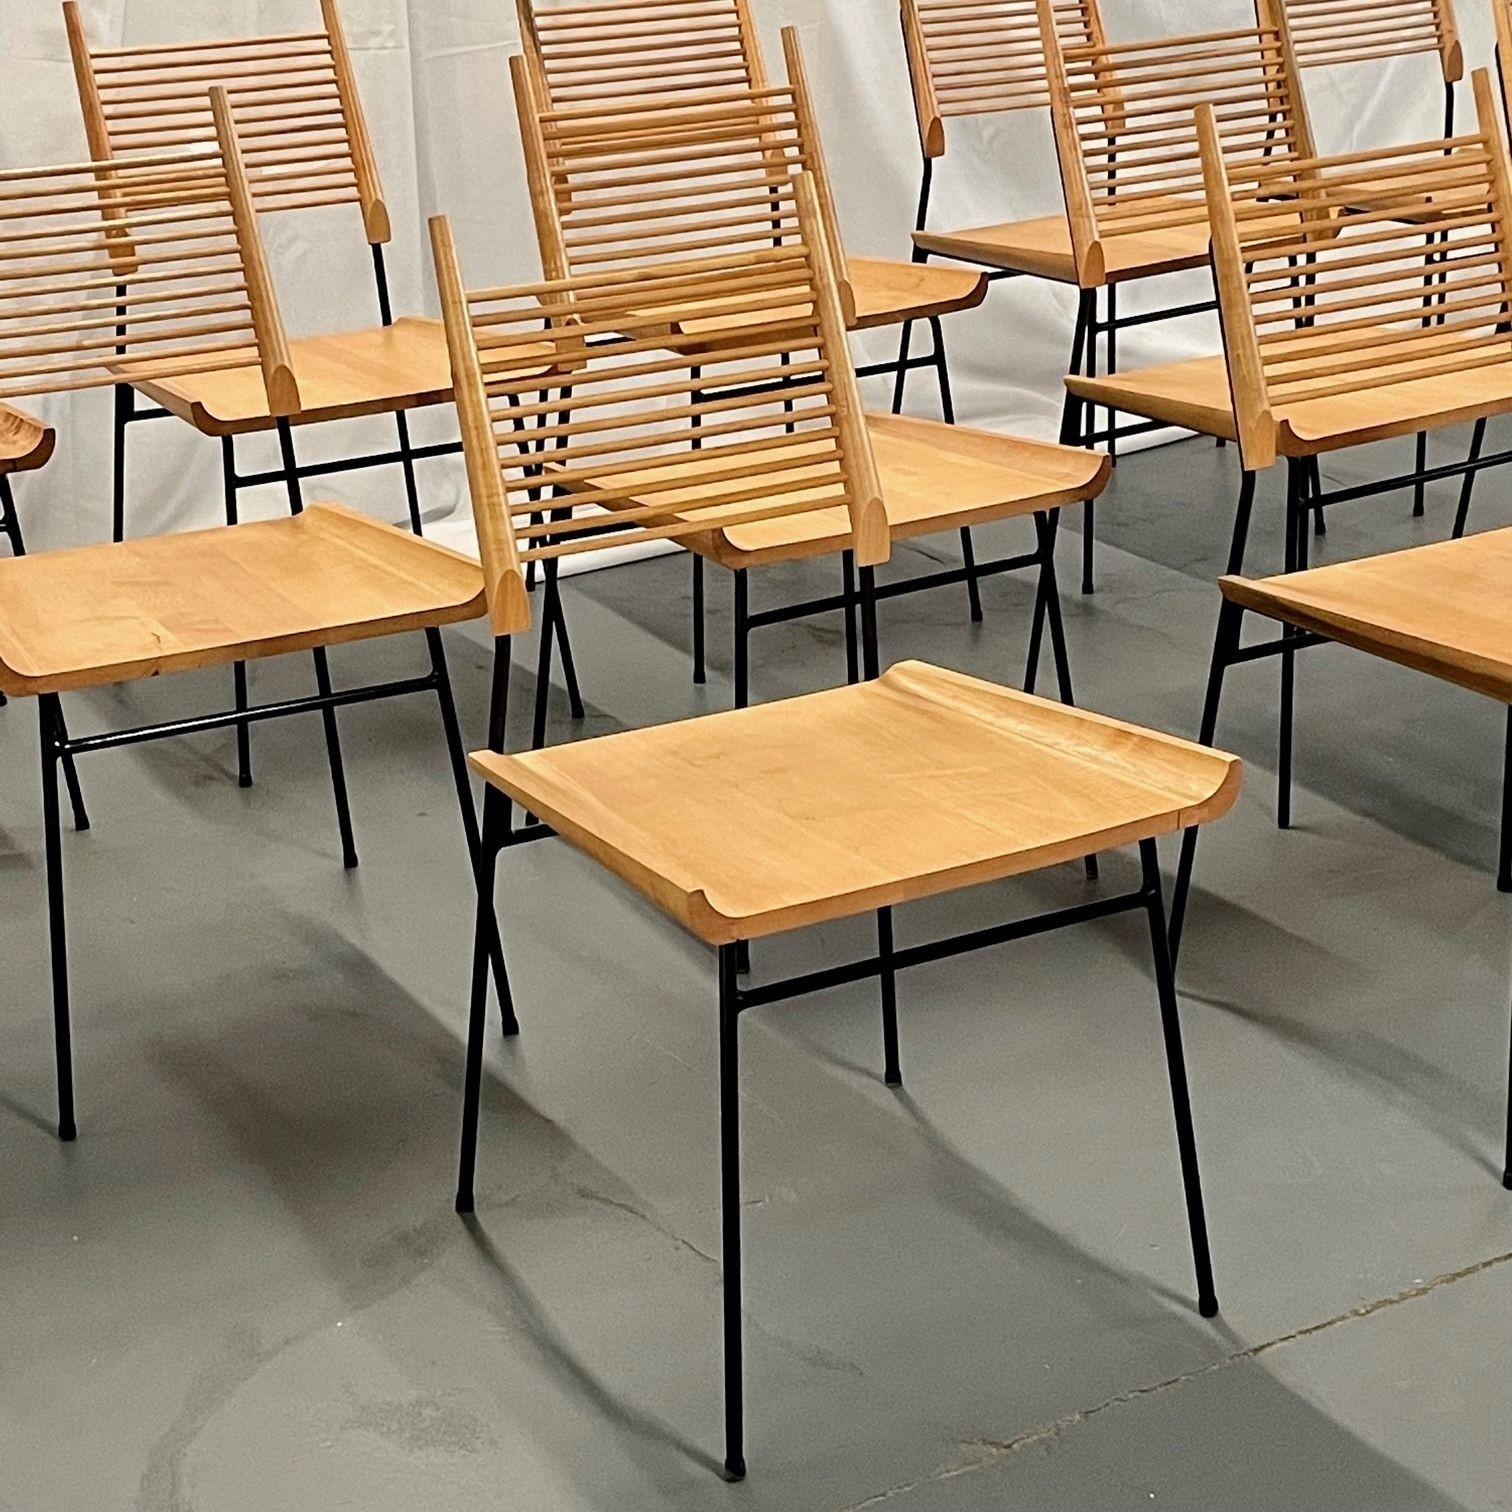 Set of 12 Mid-Century Modern Paul McCobb Side / Dining Chairs, 'Shovel' Chairs In Good Condition For Sale In Stamford, CT